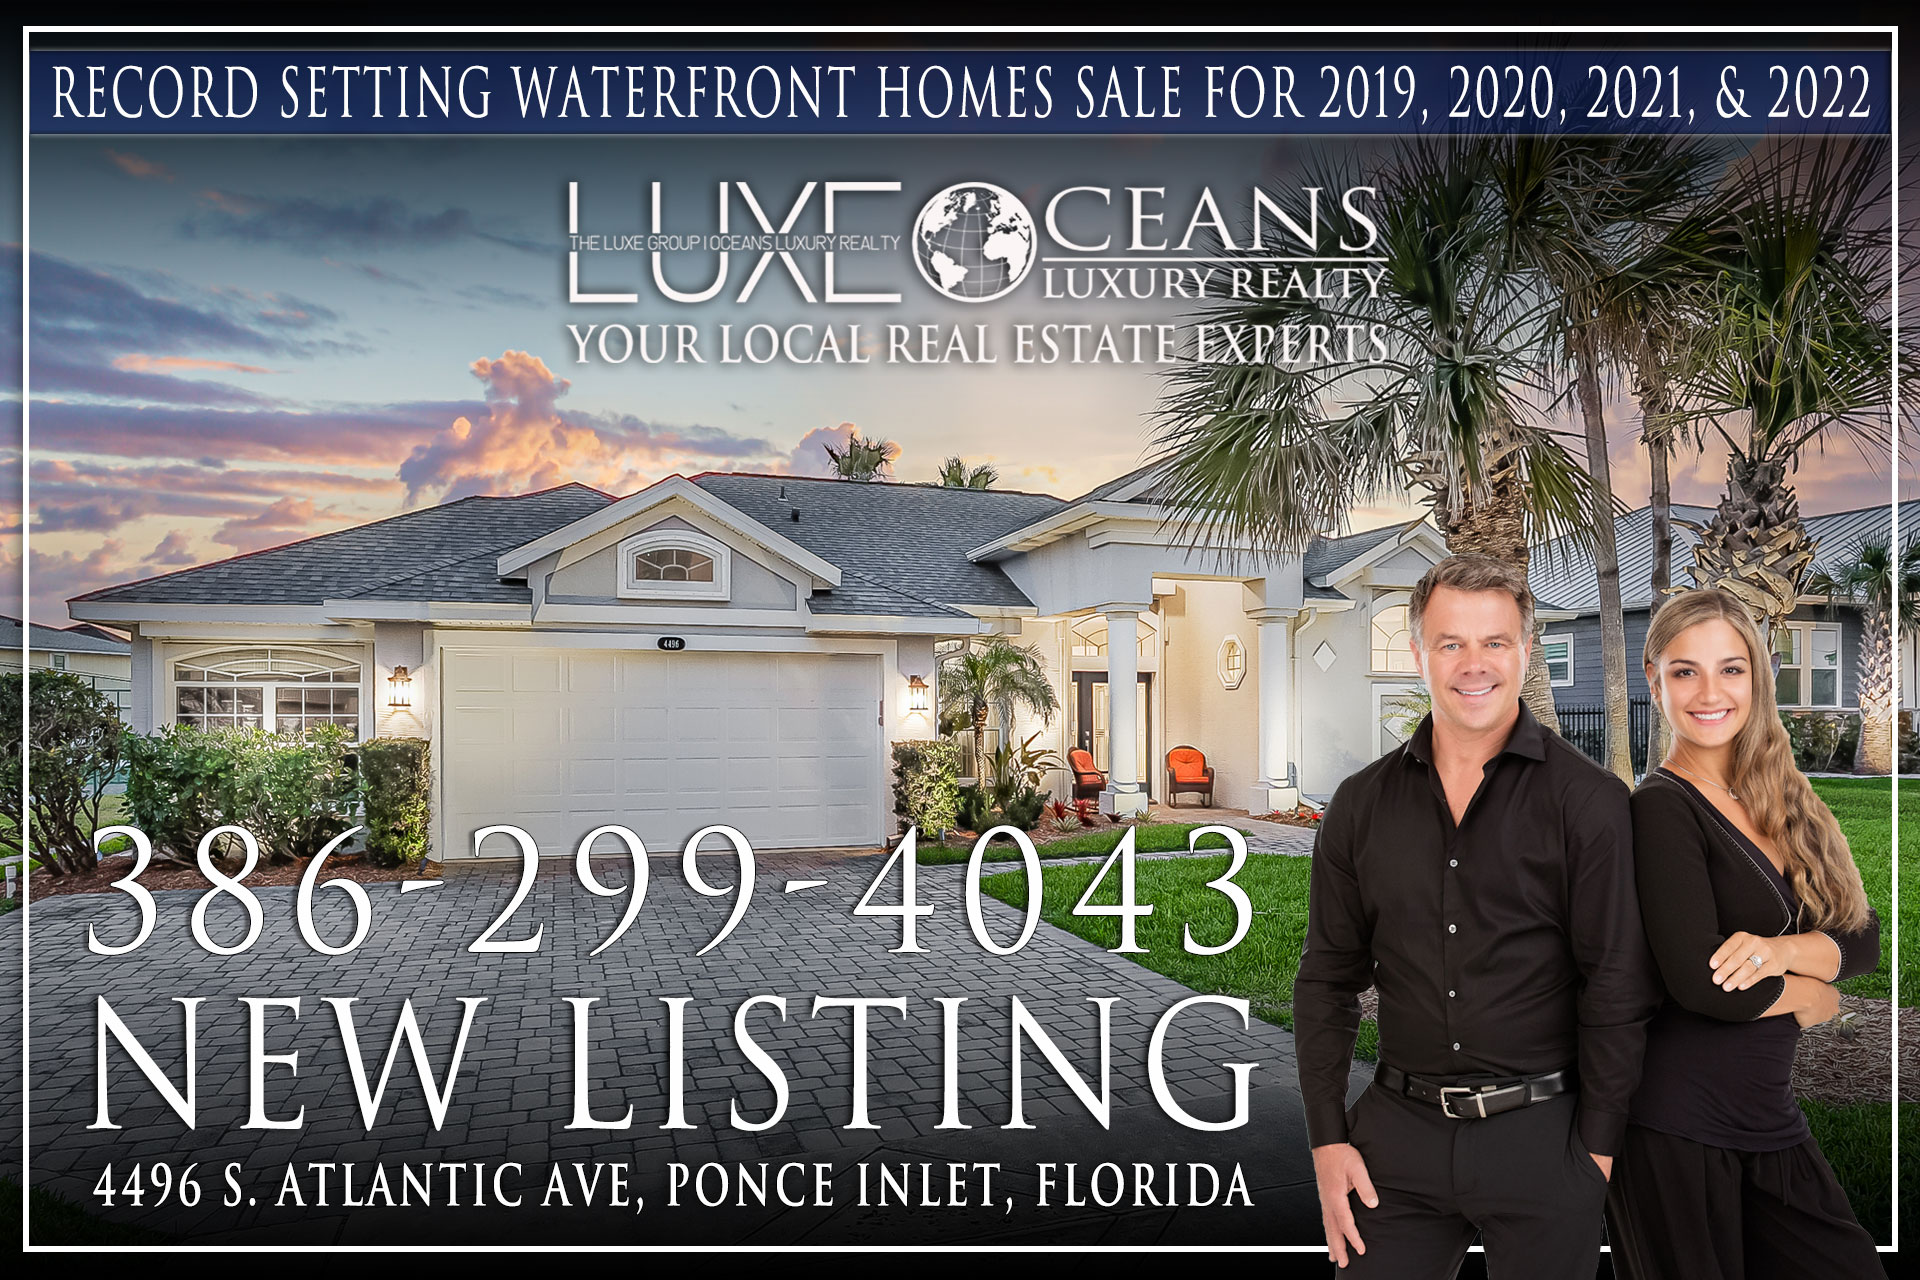 4496 S Atlantic Ave in Ponce Inlet, Florida. Luxury waterfront homes for sale in Daytona Beach Shore,FL. The LUXE Group at Oceans Luxury Realty 386-299-4043